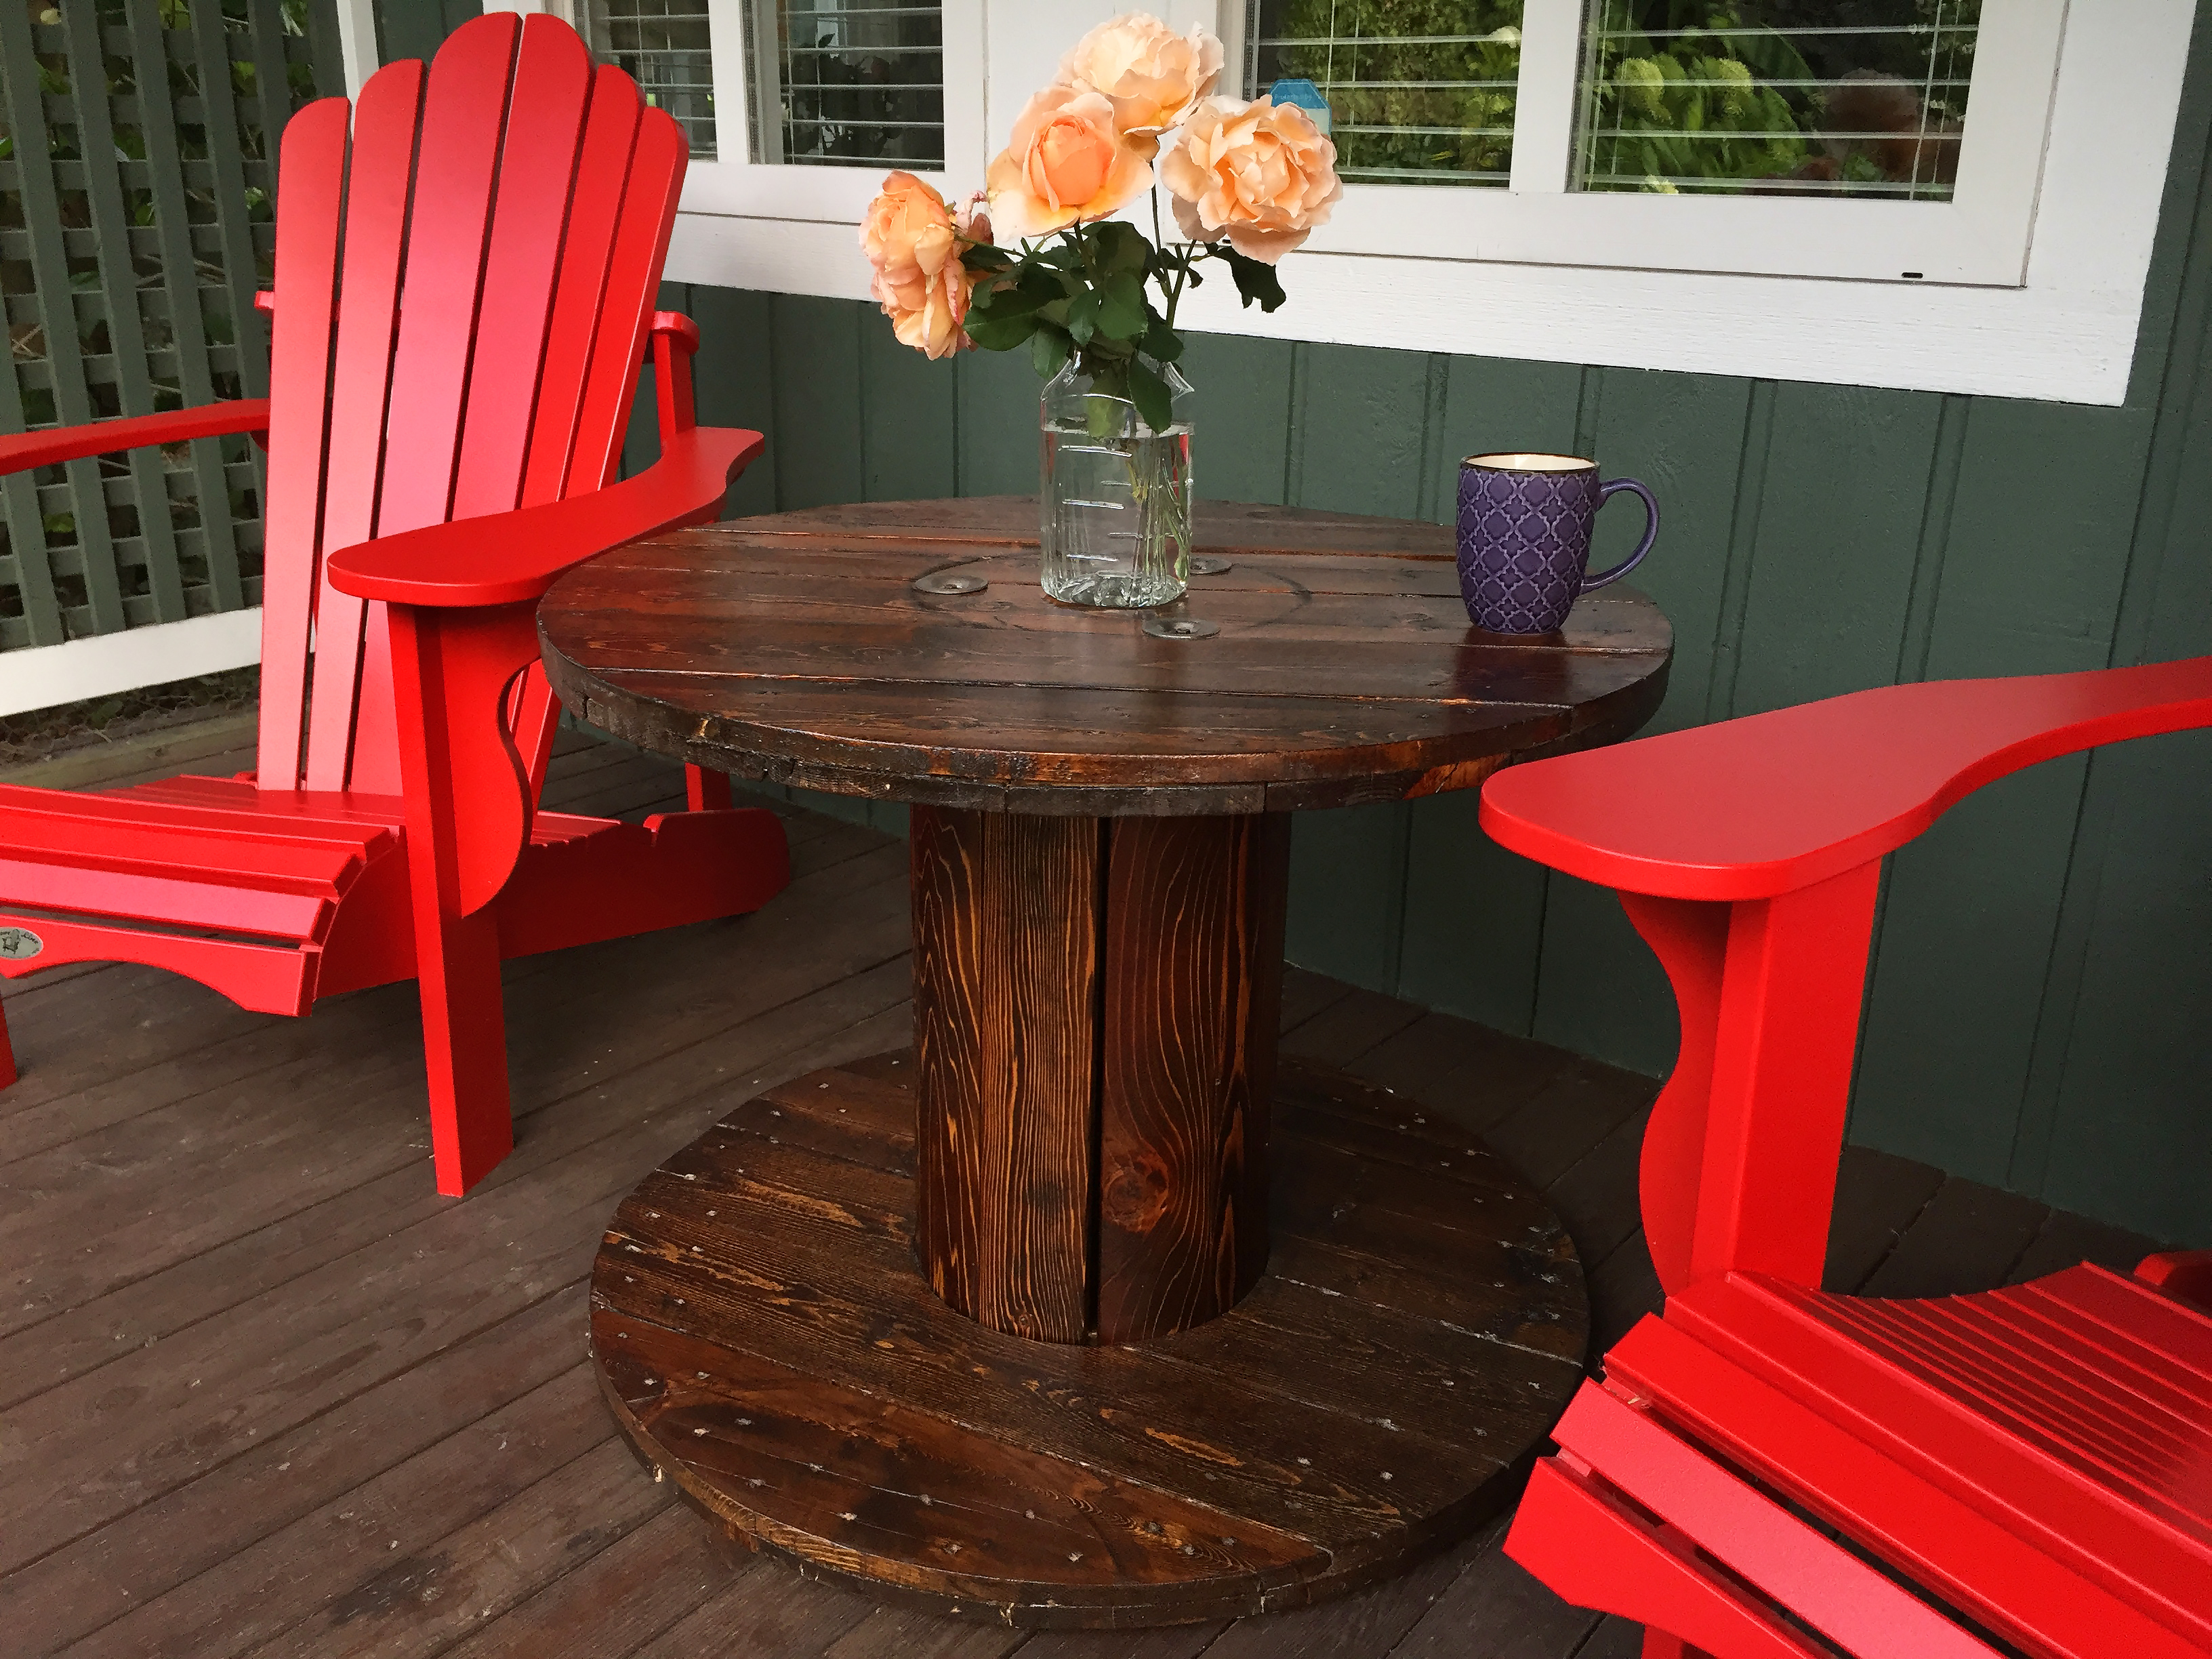 PLANS: Wooden Cable Reel Table Patio Set Wire Spool Drum Round